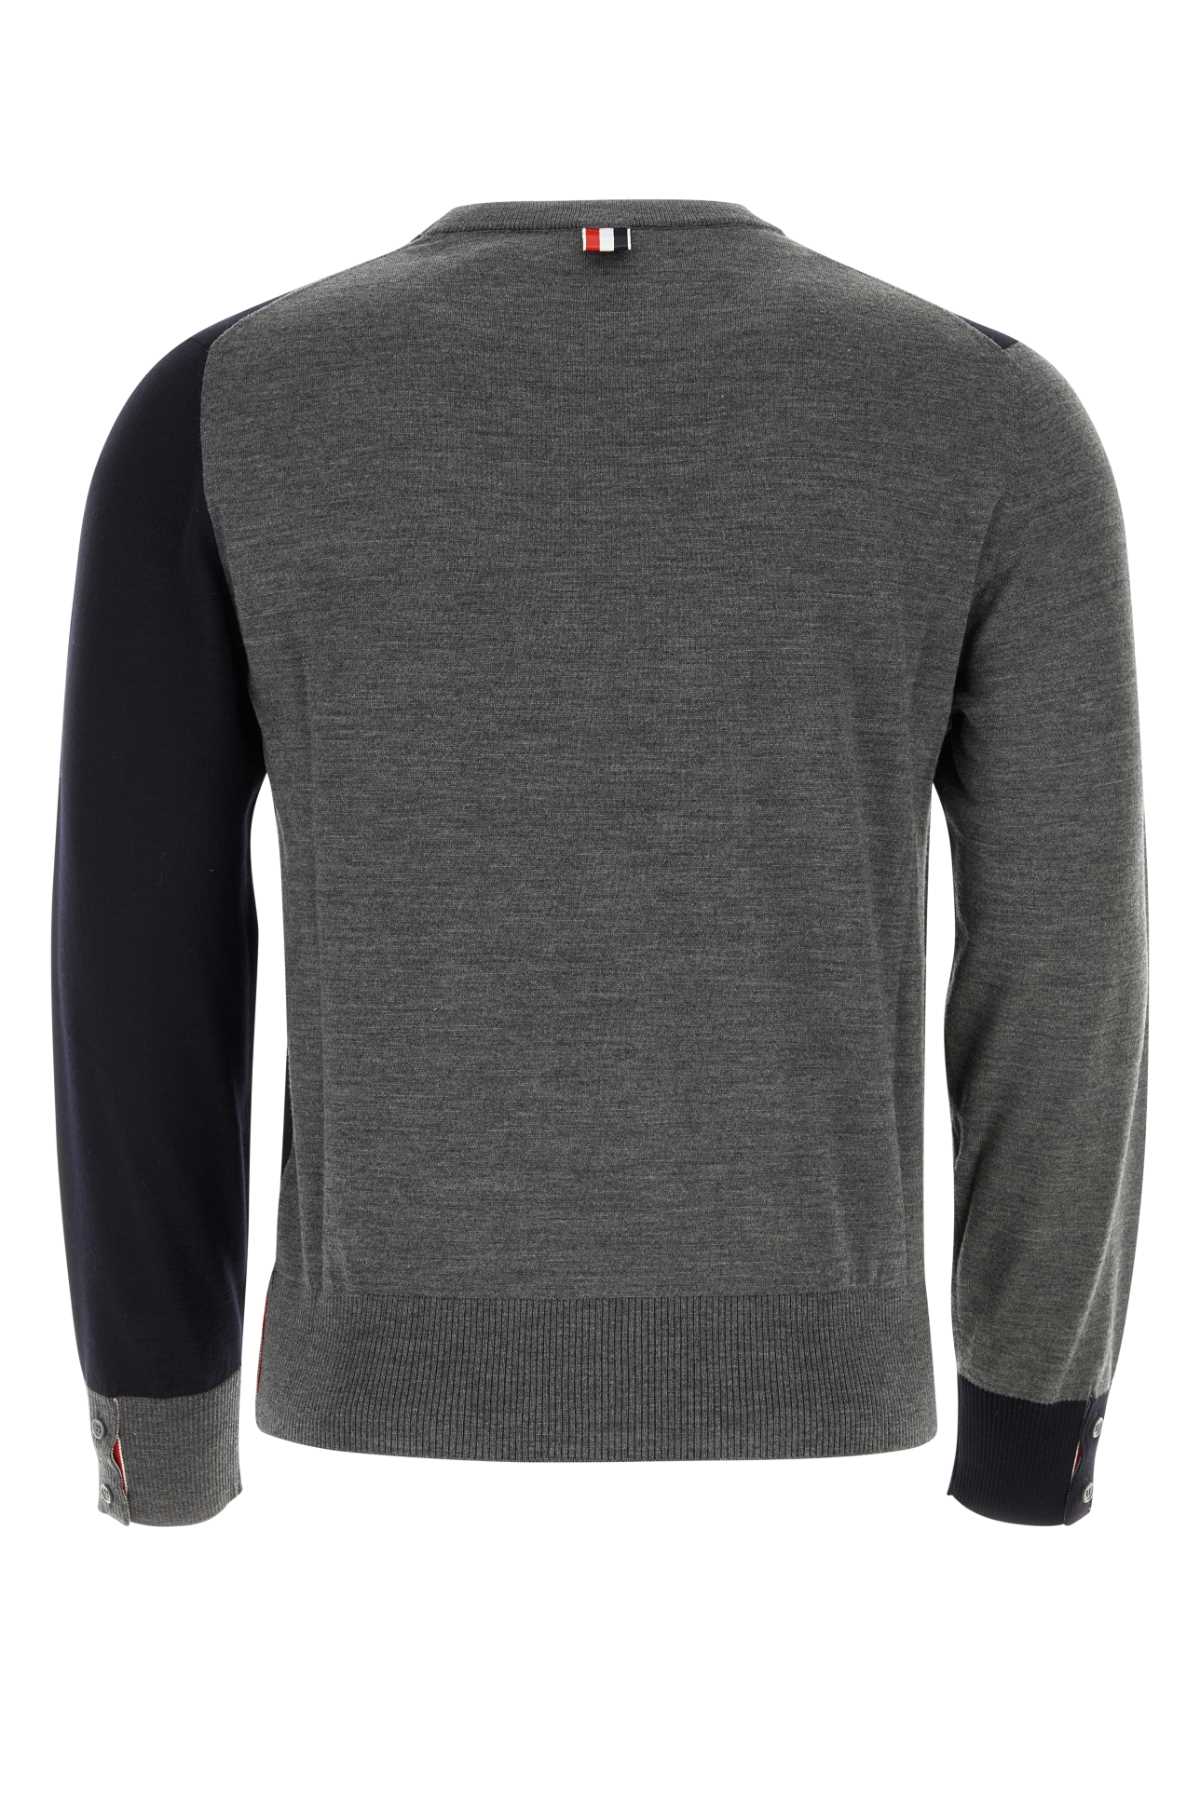 Thom Browne Two-tone Wool Blend Sweater In Navy